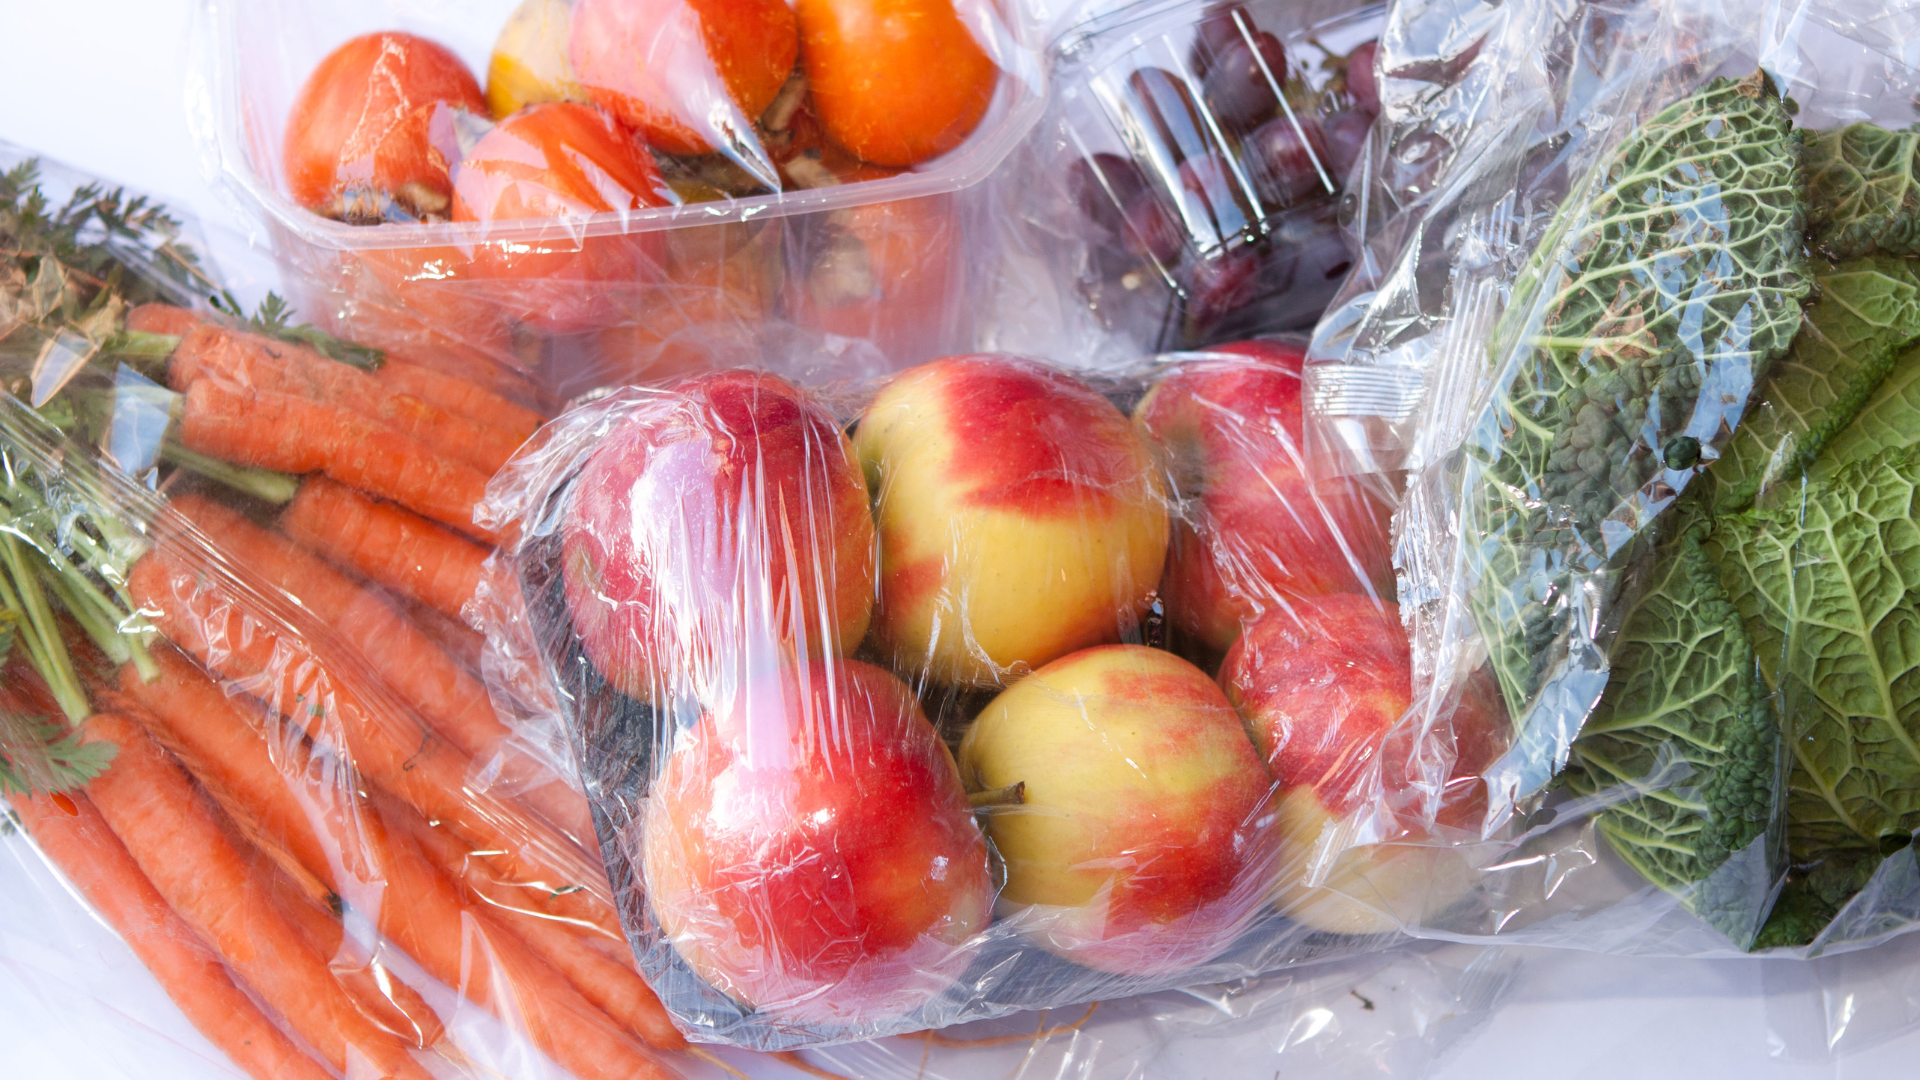 Produce from the grocery store packaged in plastic